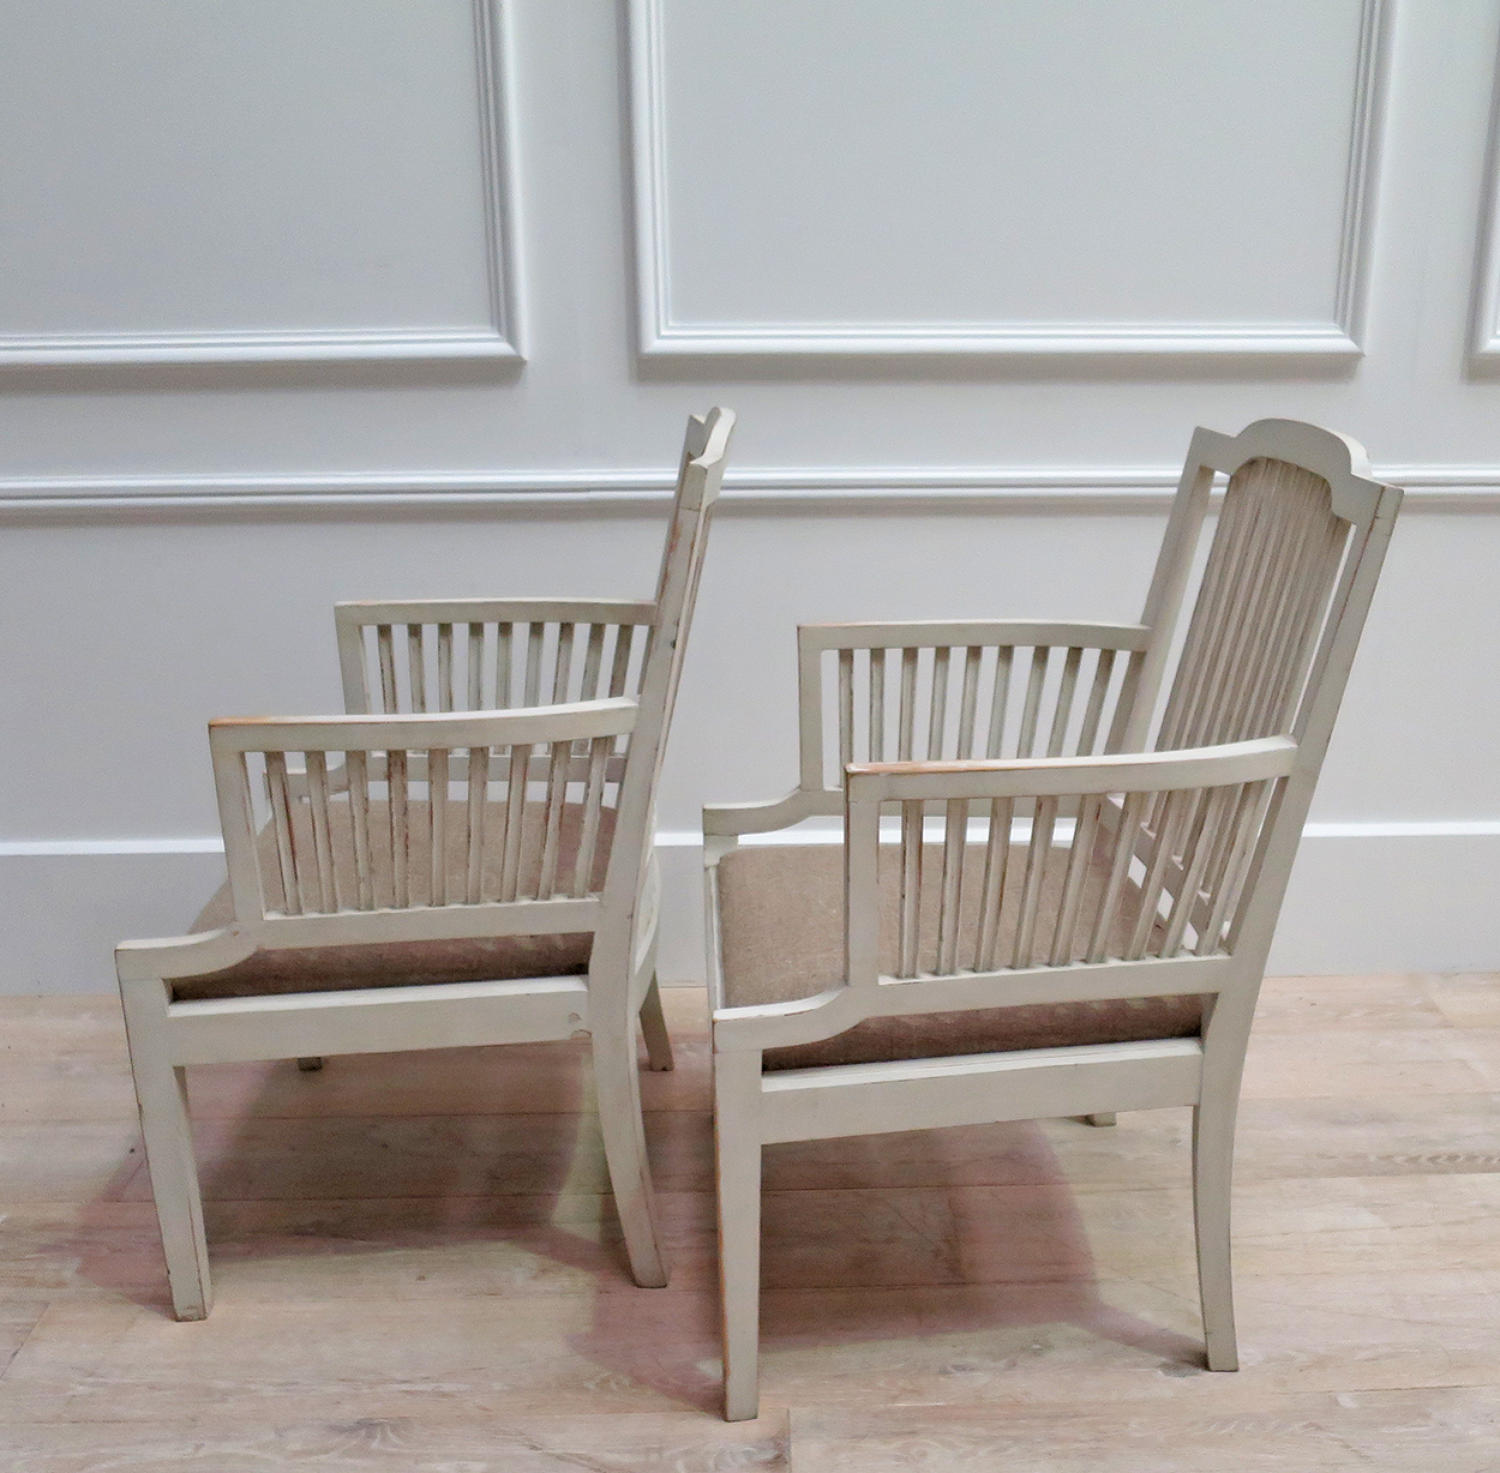 Pair of Swedish Armchairs with antique linen seats - circa 1950